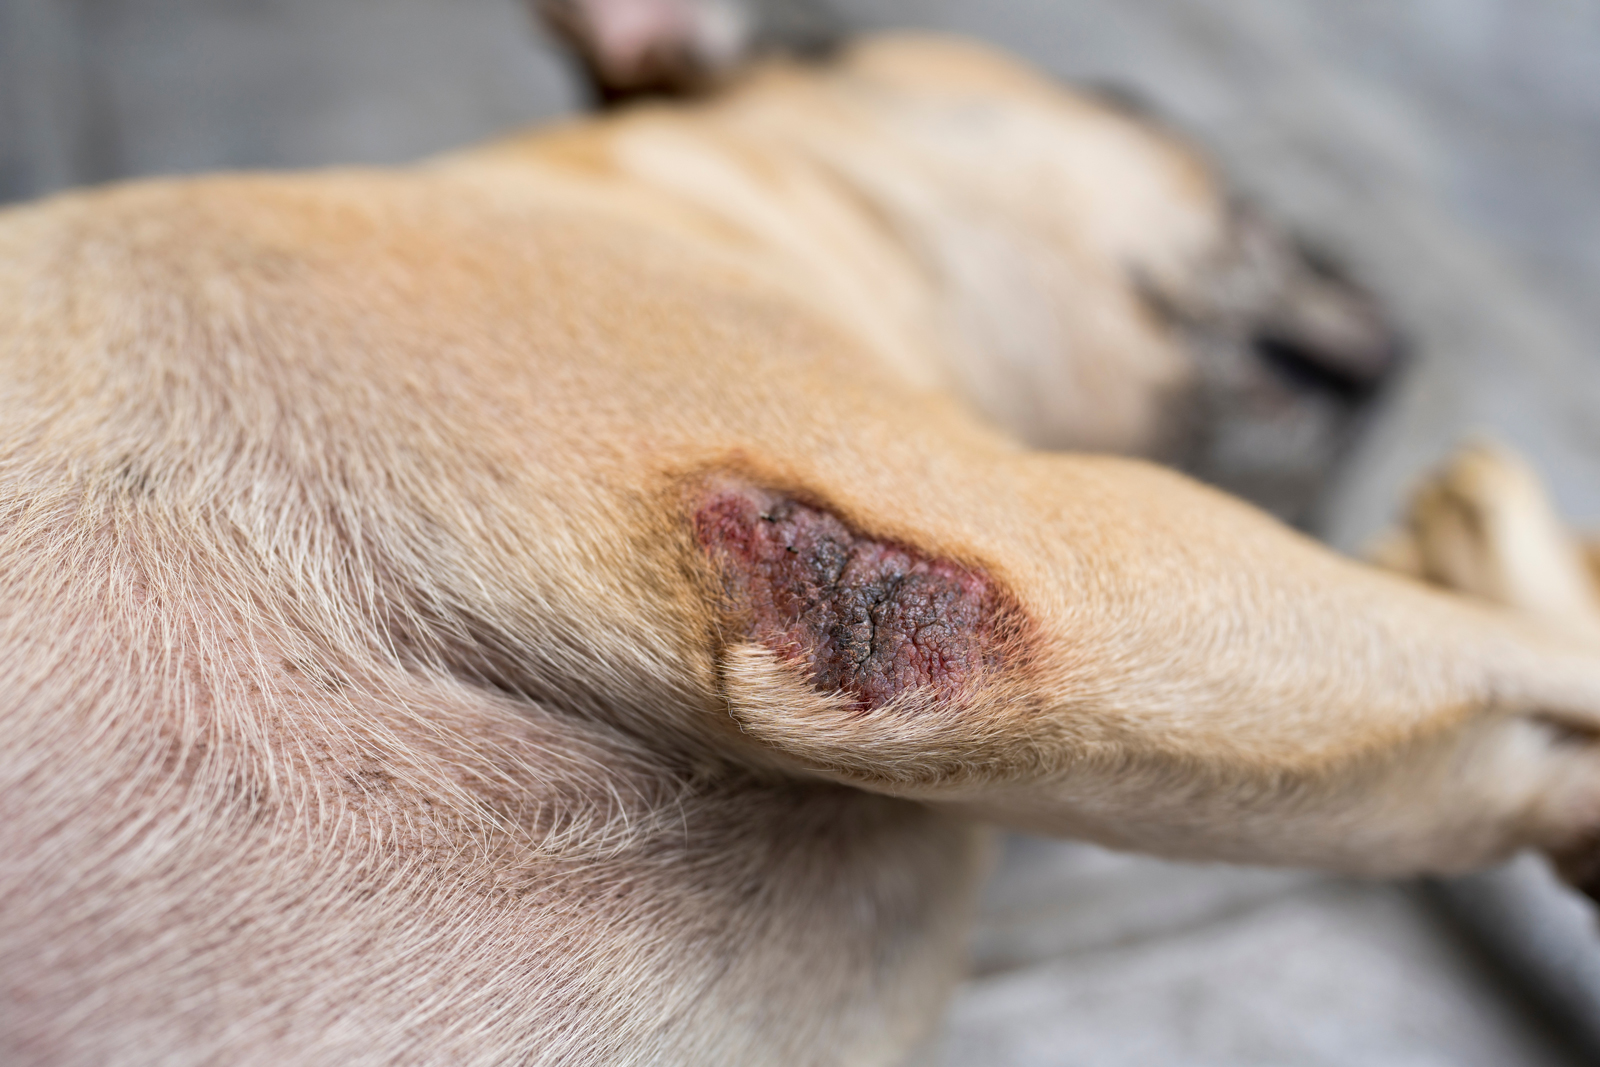 A Close-Up Of A Dog'S Skin With Allergies And Sensitivities